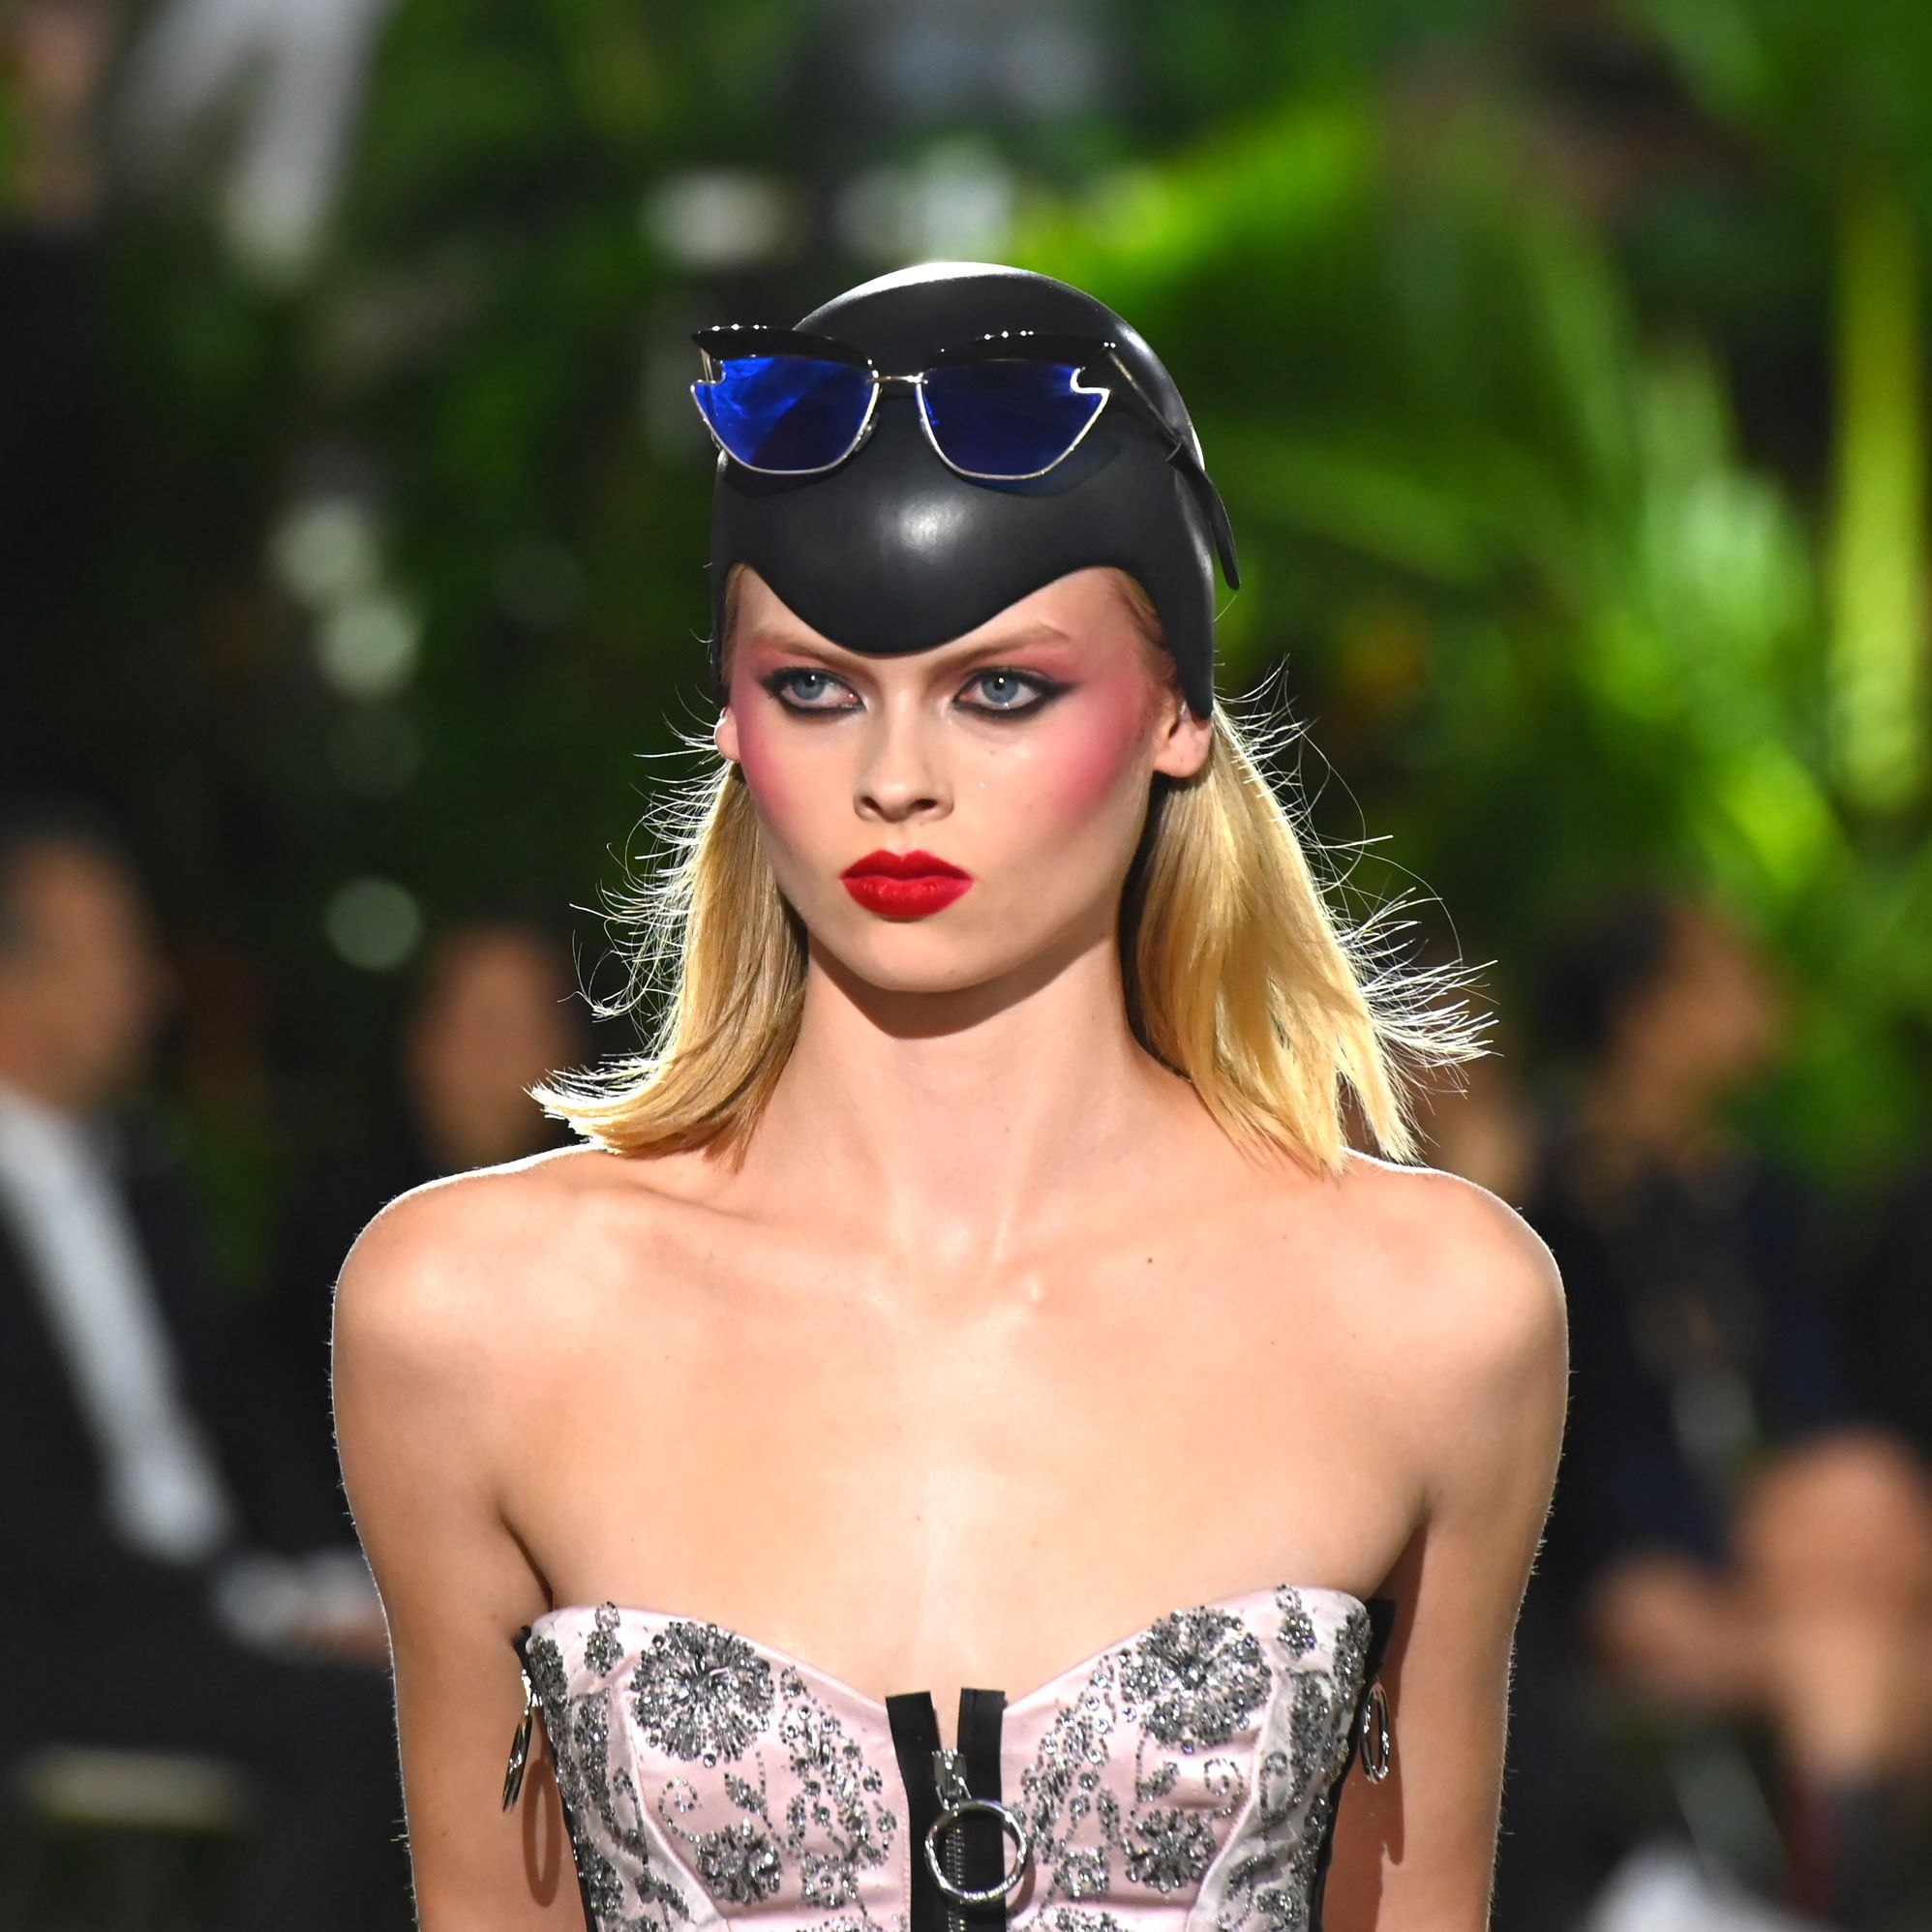 Louis Vuitton Confirms More Make-Up Is More With '80s 'Bladerunner' Blusher